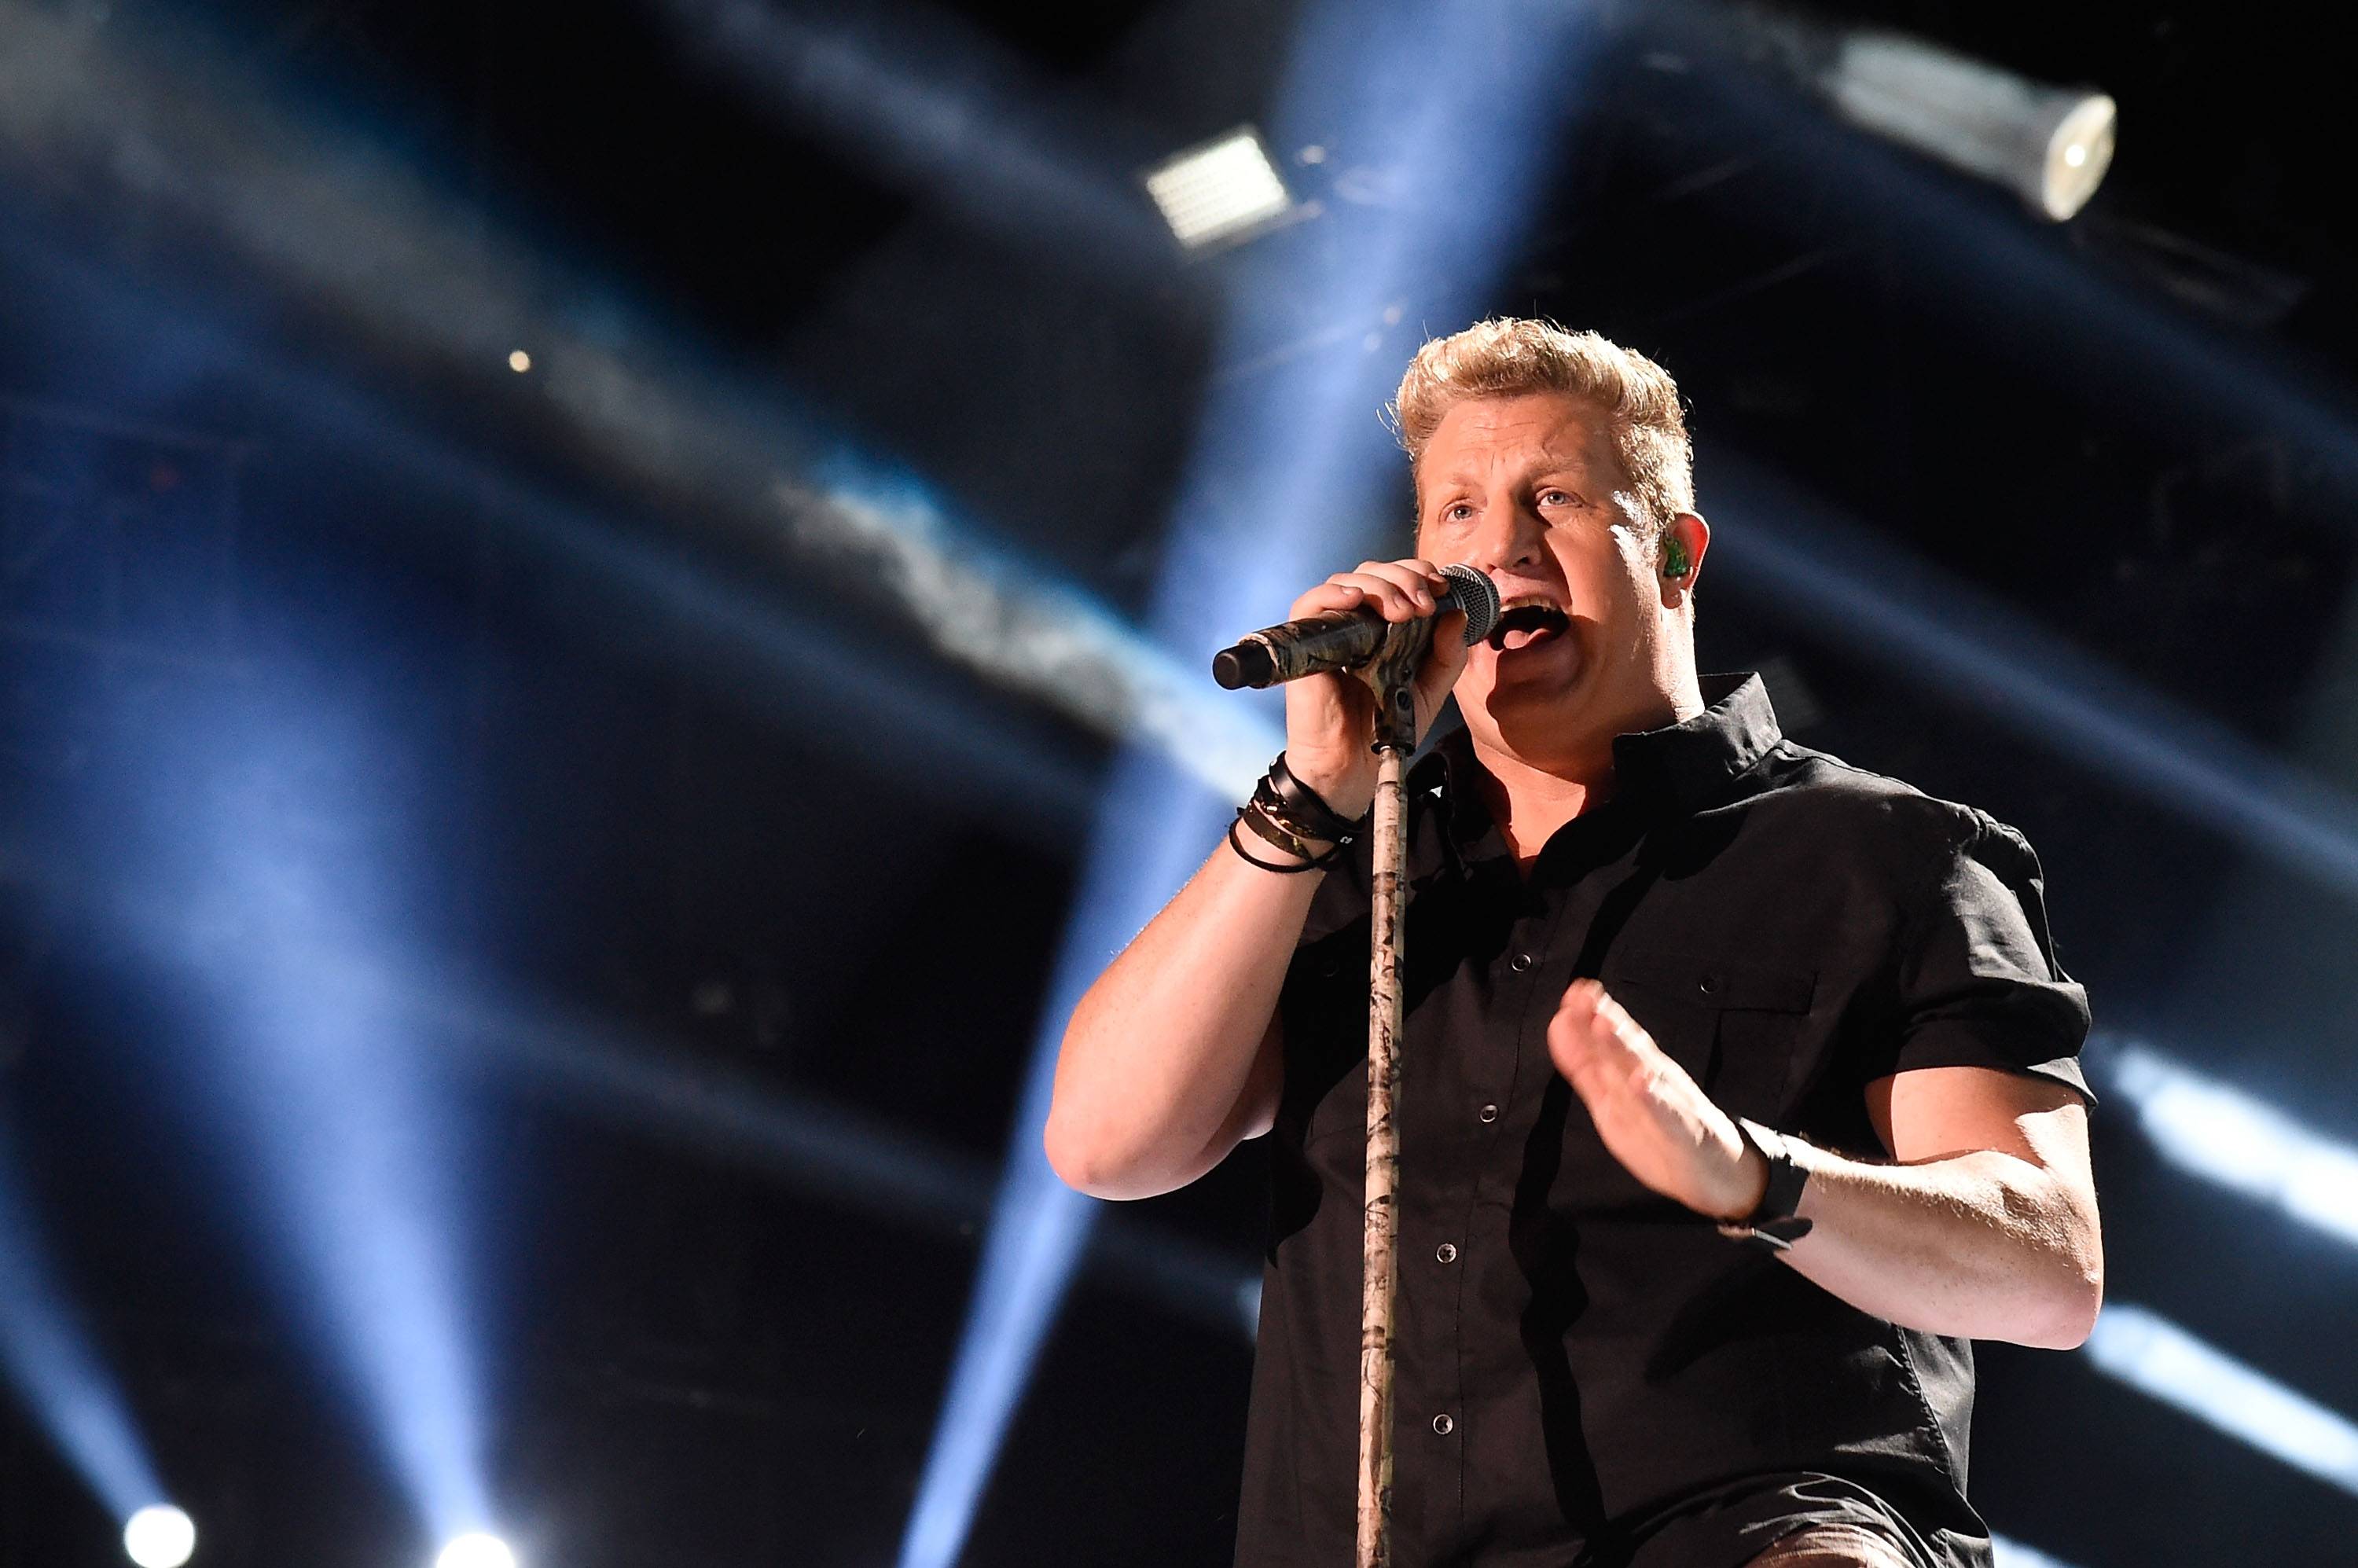 Gary LeVox Talks Solo Christian Track “The Distance” and Collaborating